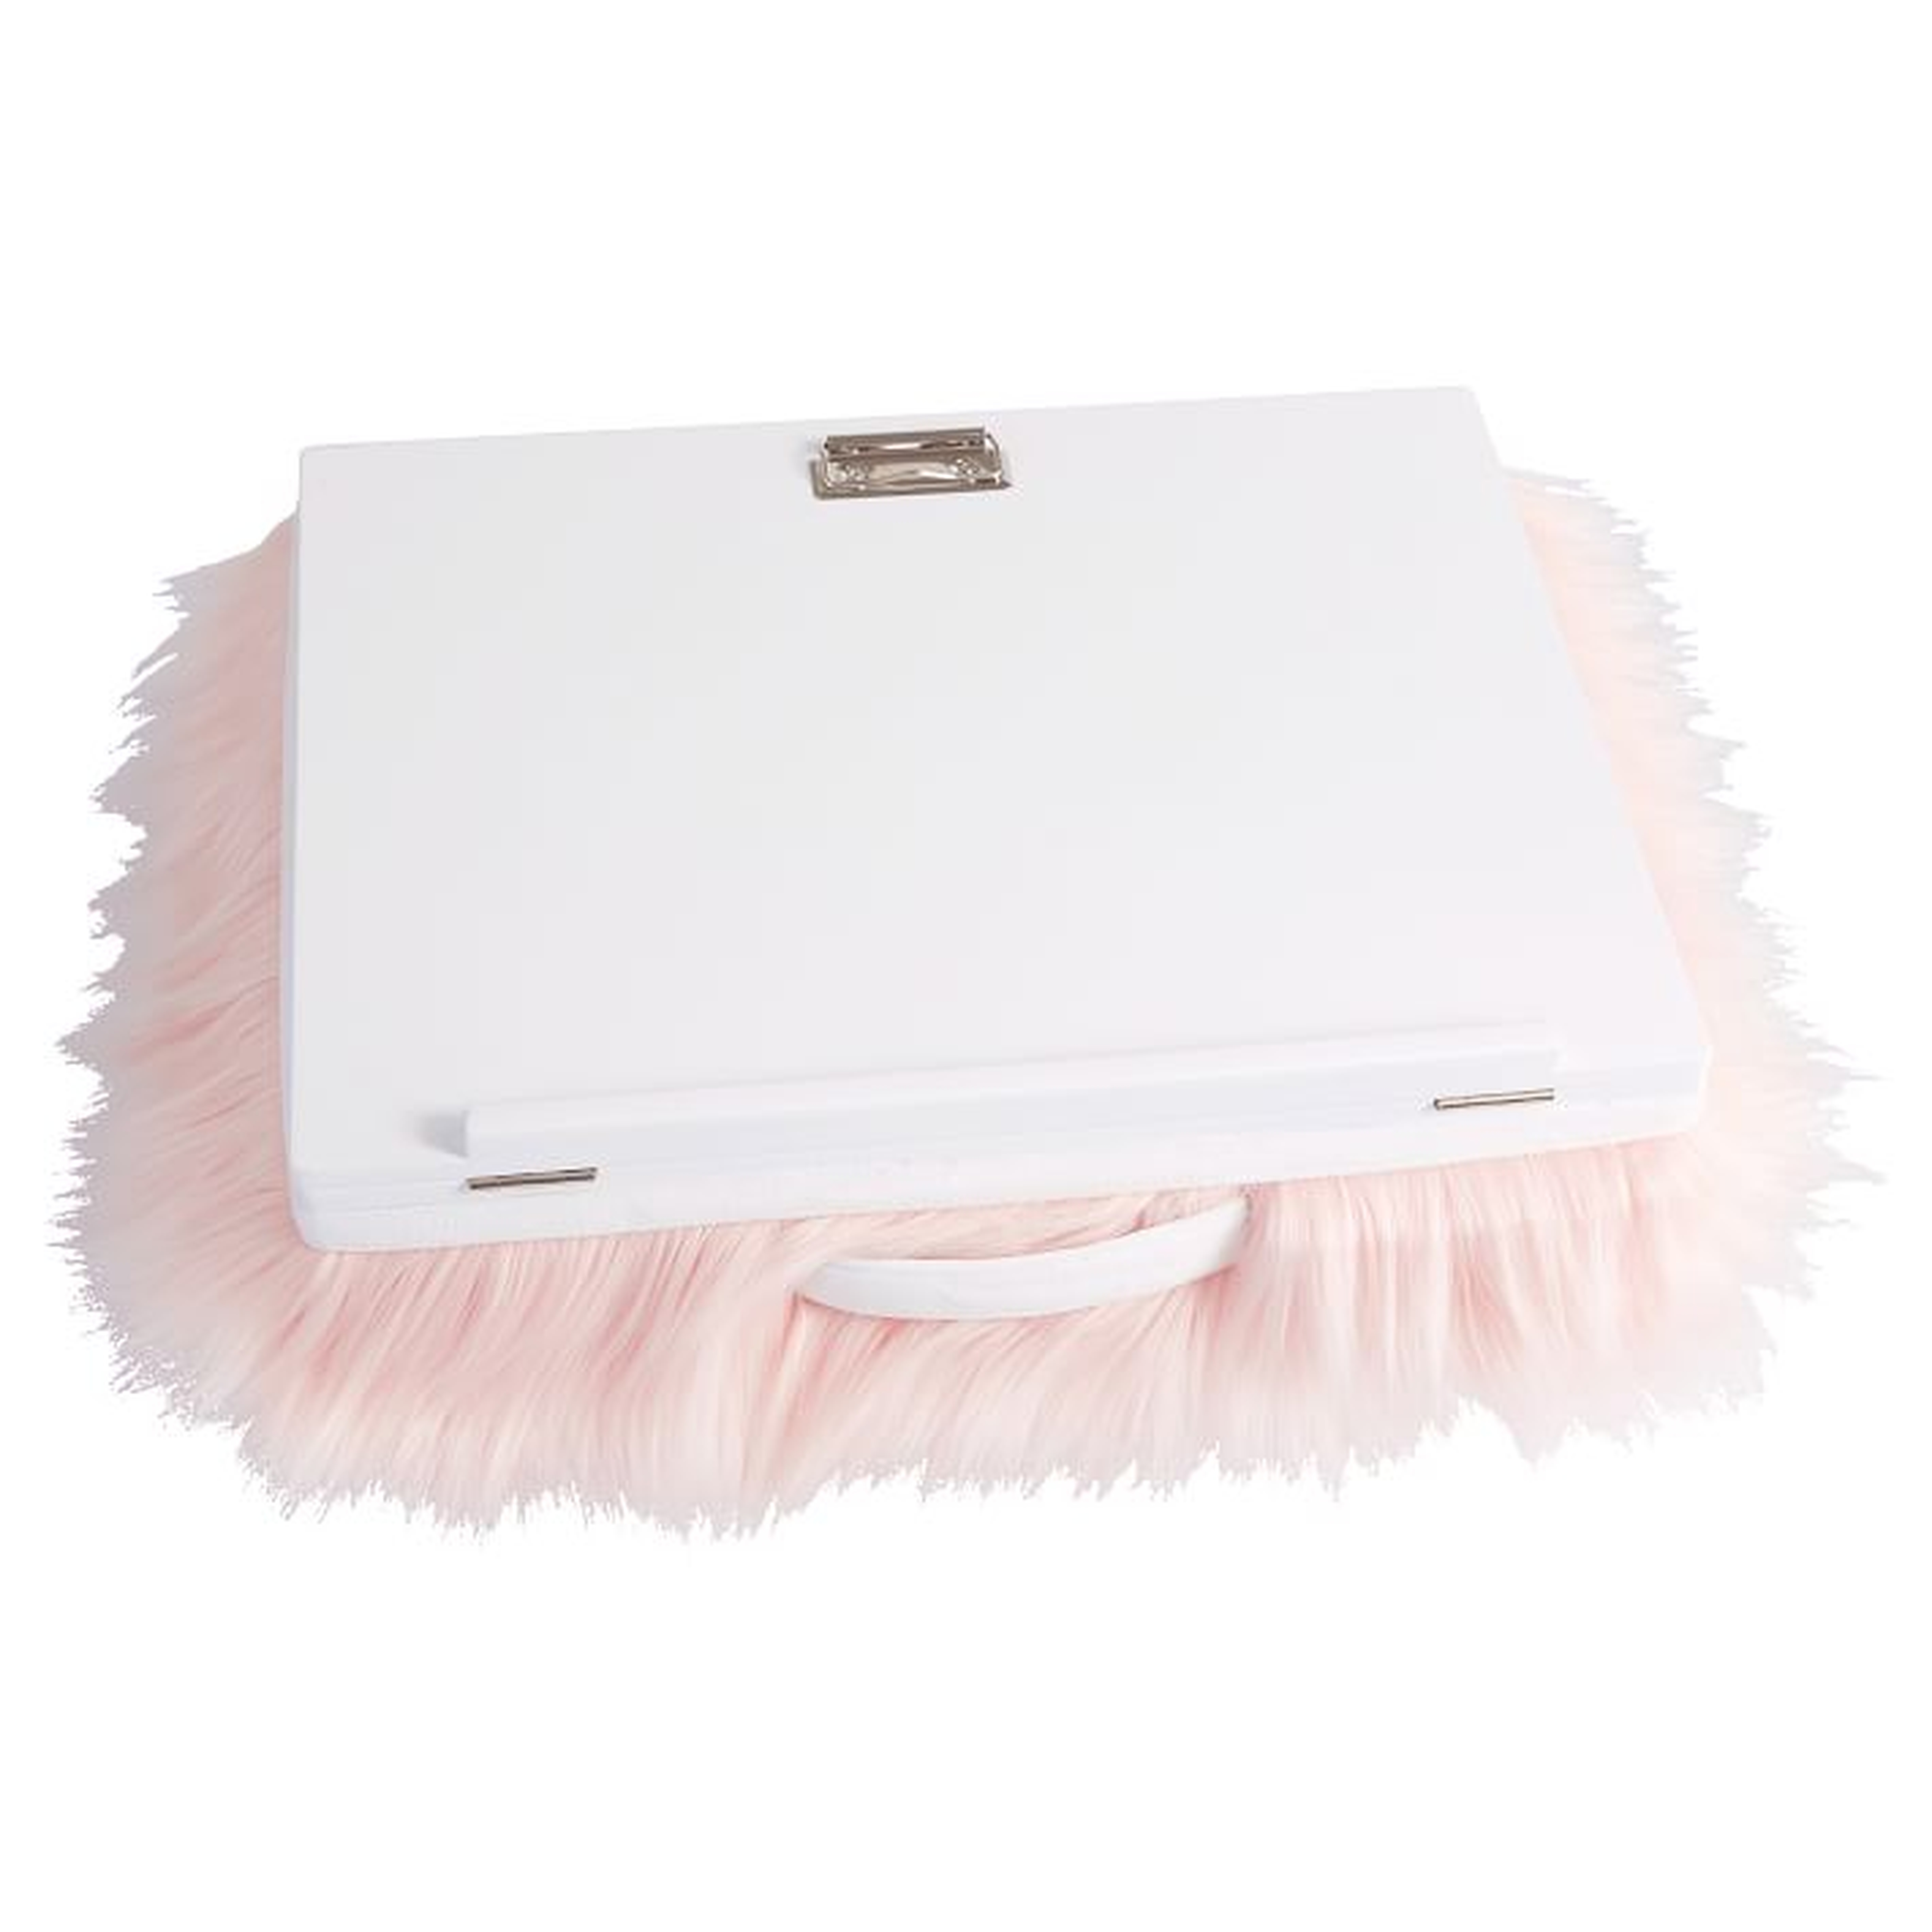 Faux-Fur Adjustable Superstorage Lapdesk, Blush Himalayan - Pottery Barn Teen